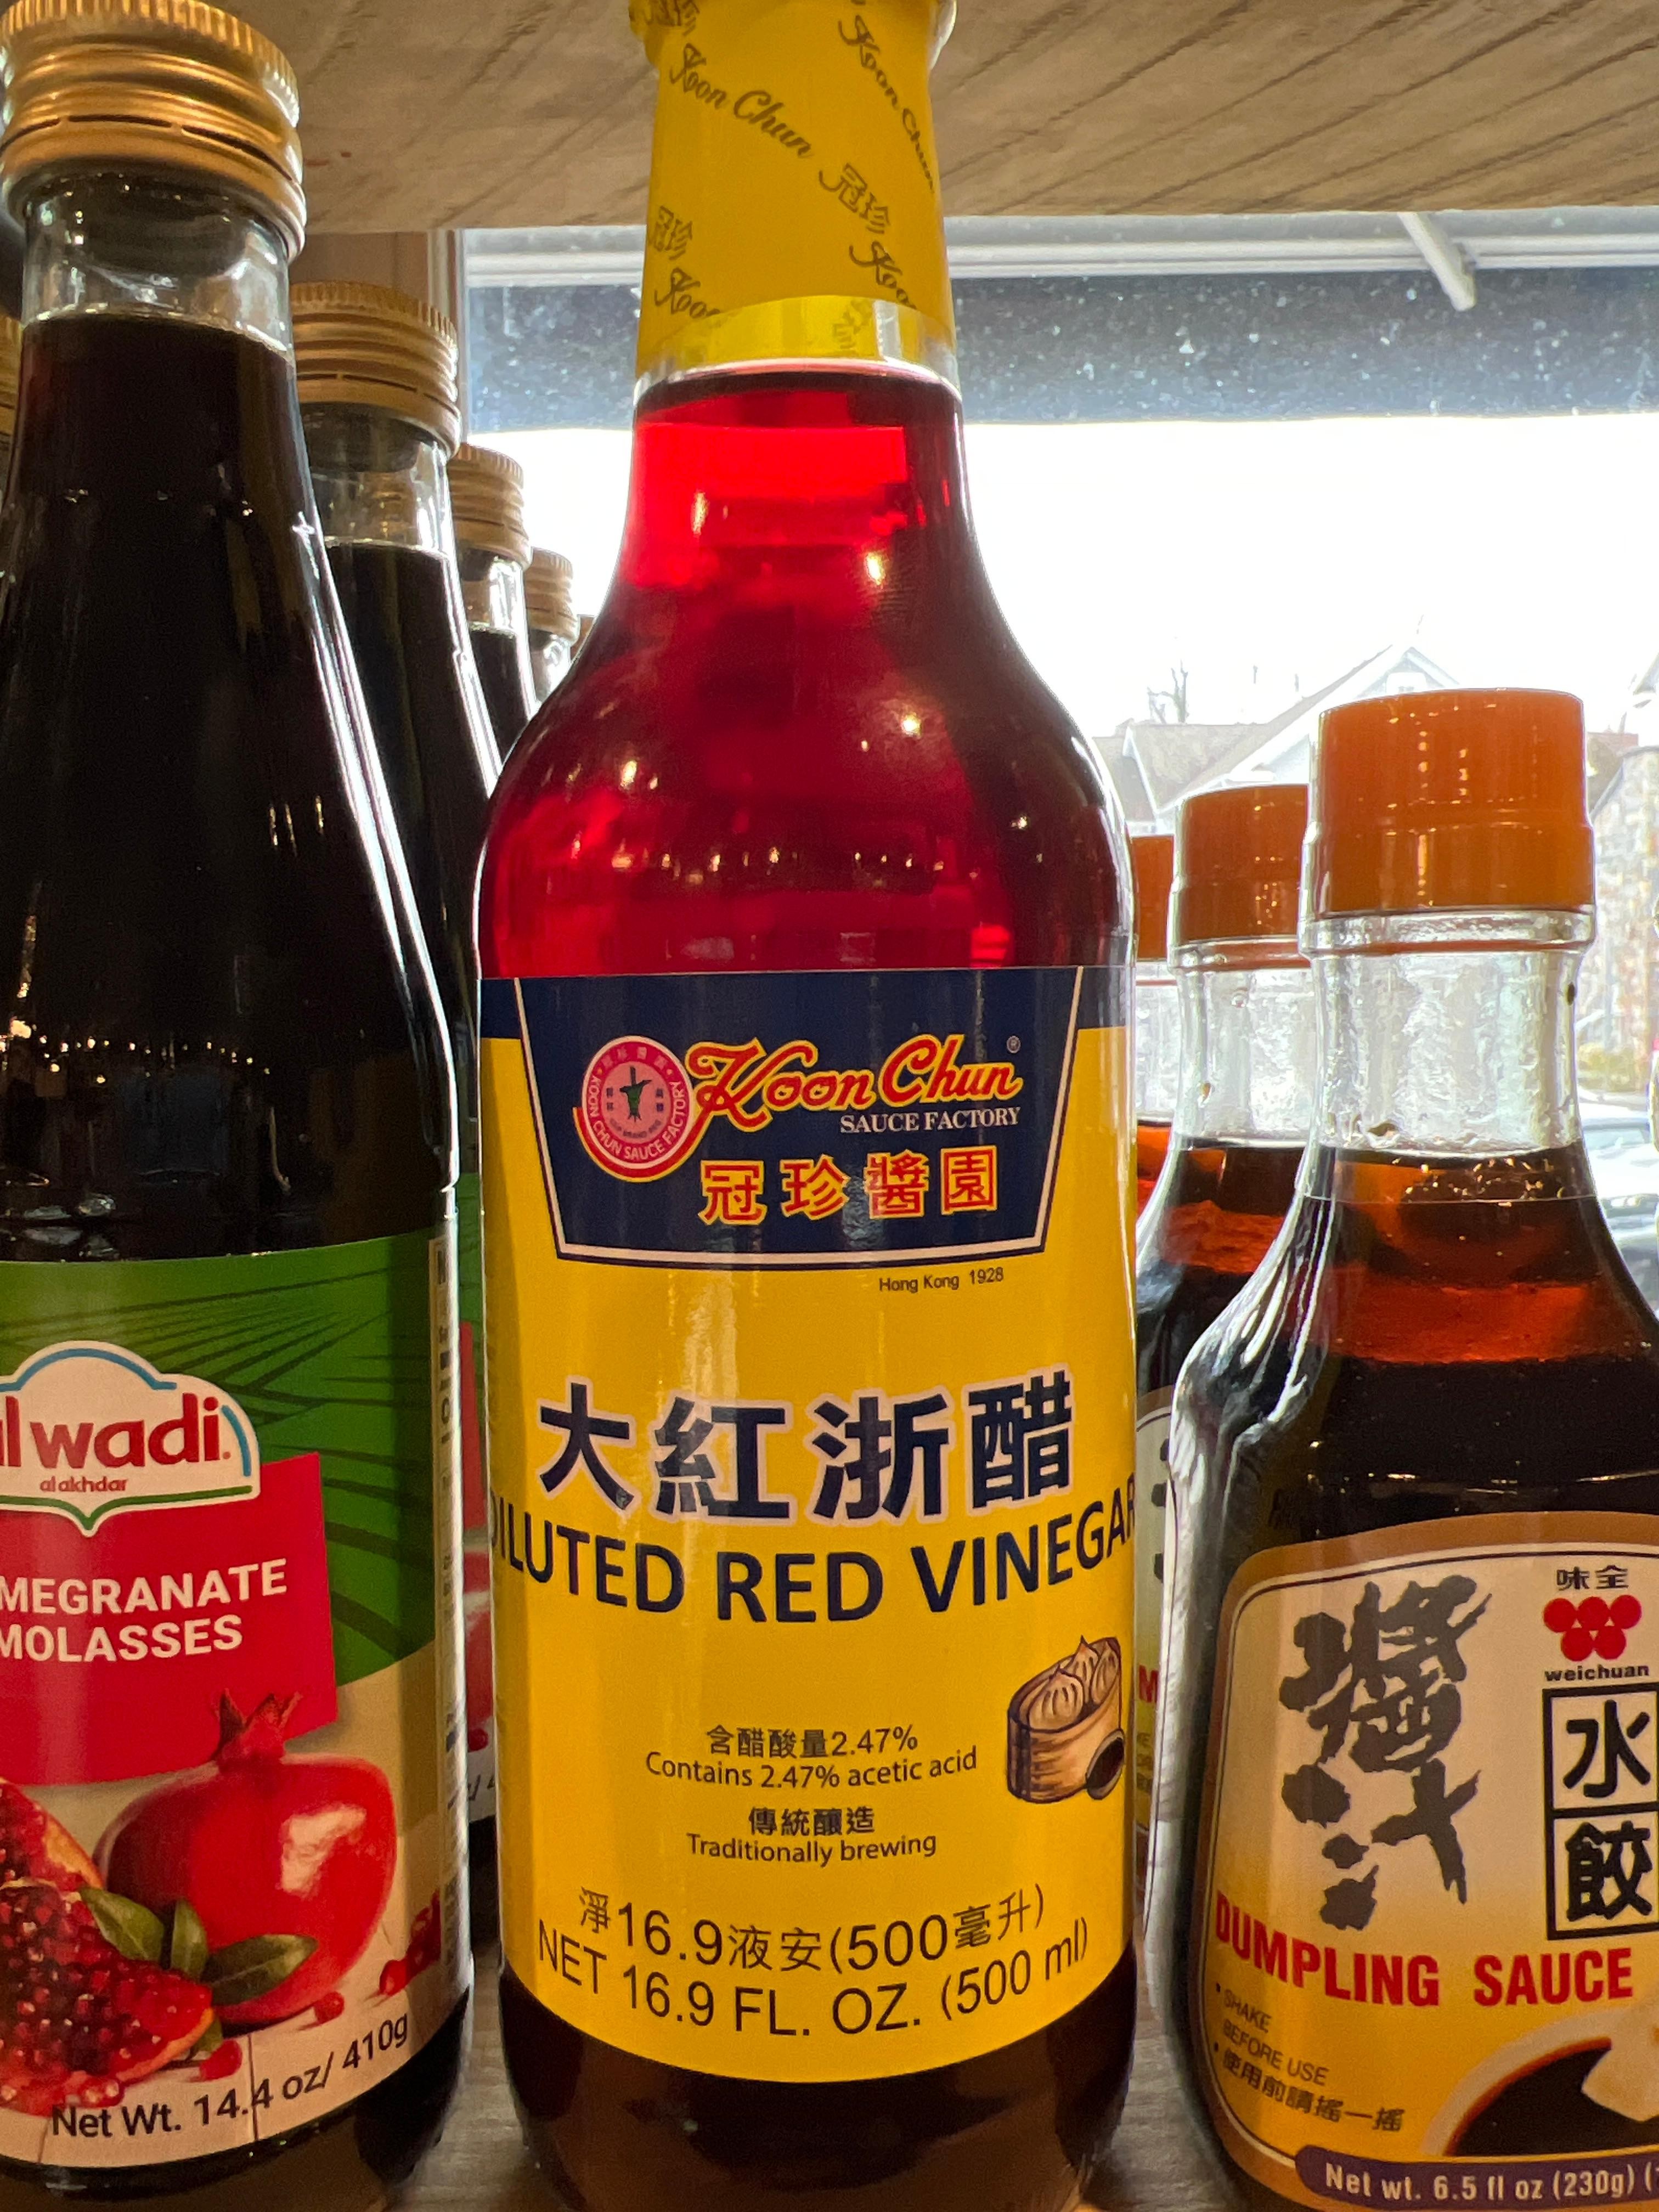 DILUTED RED VINEGAR